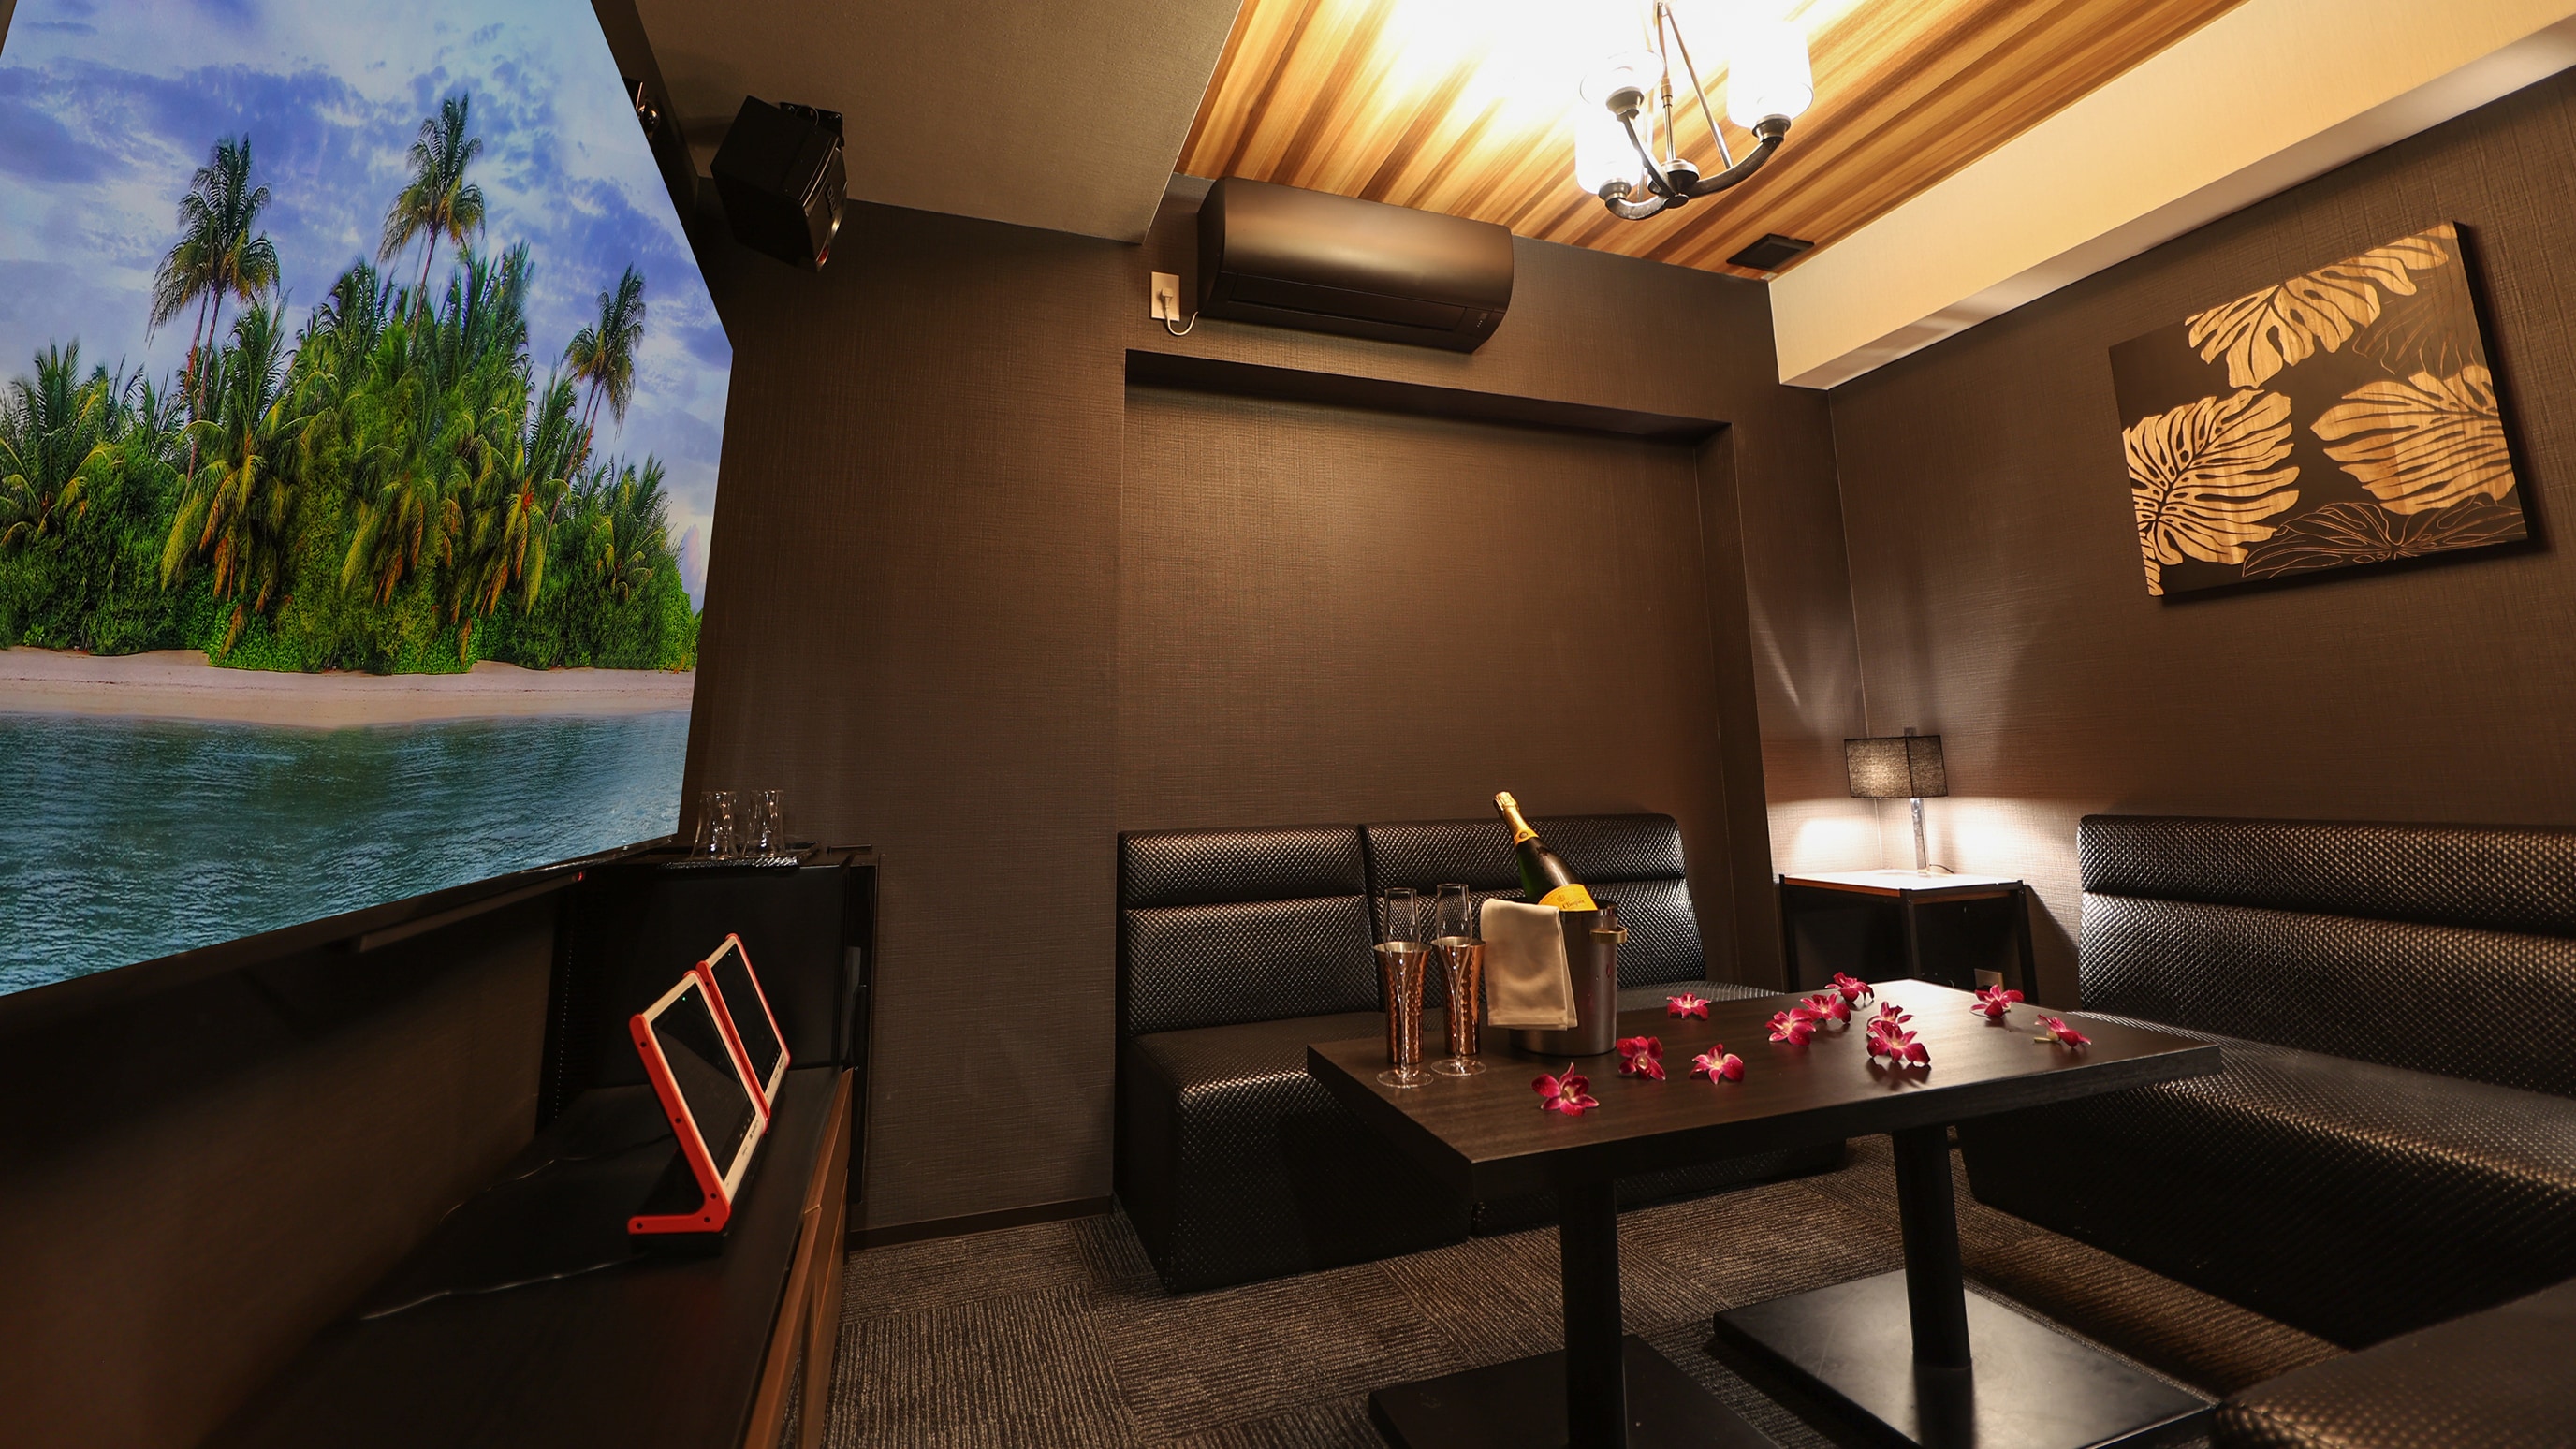 [Karaoke Room] Of course, guests staying at the hotel can use it free of charge.